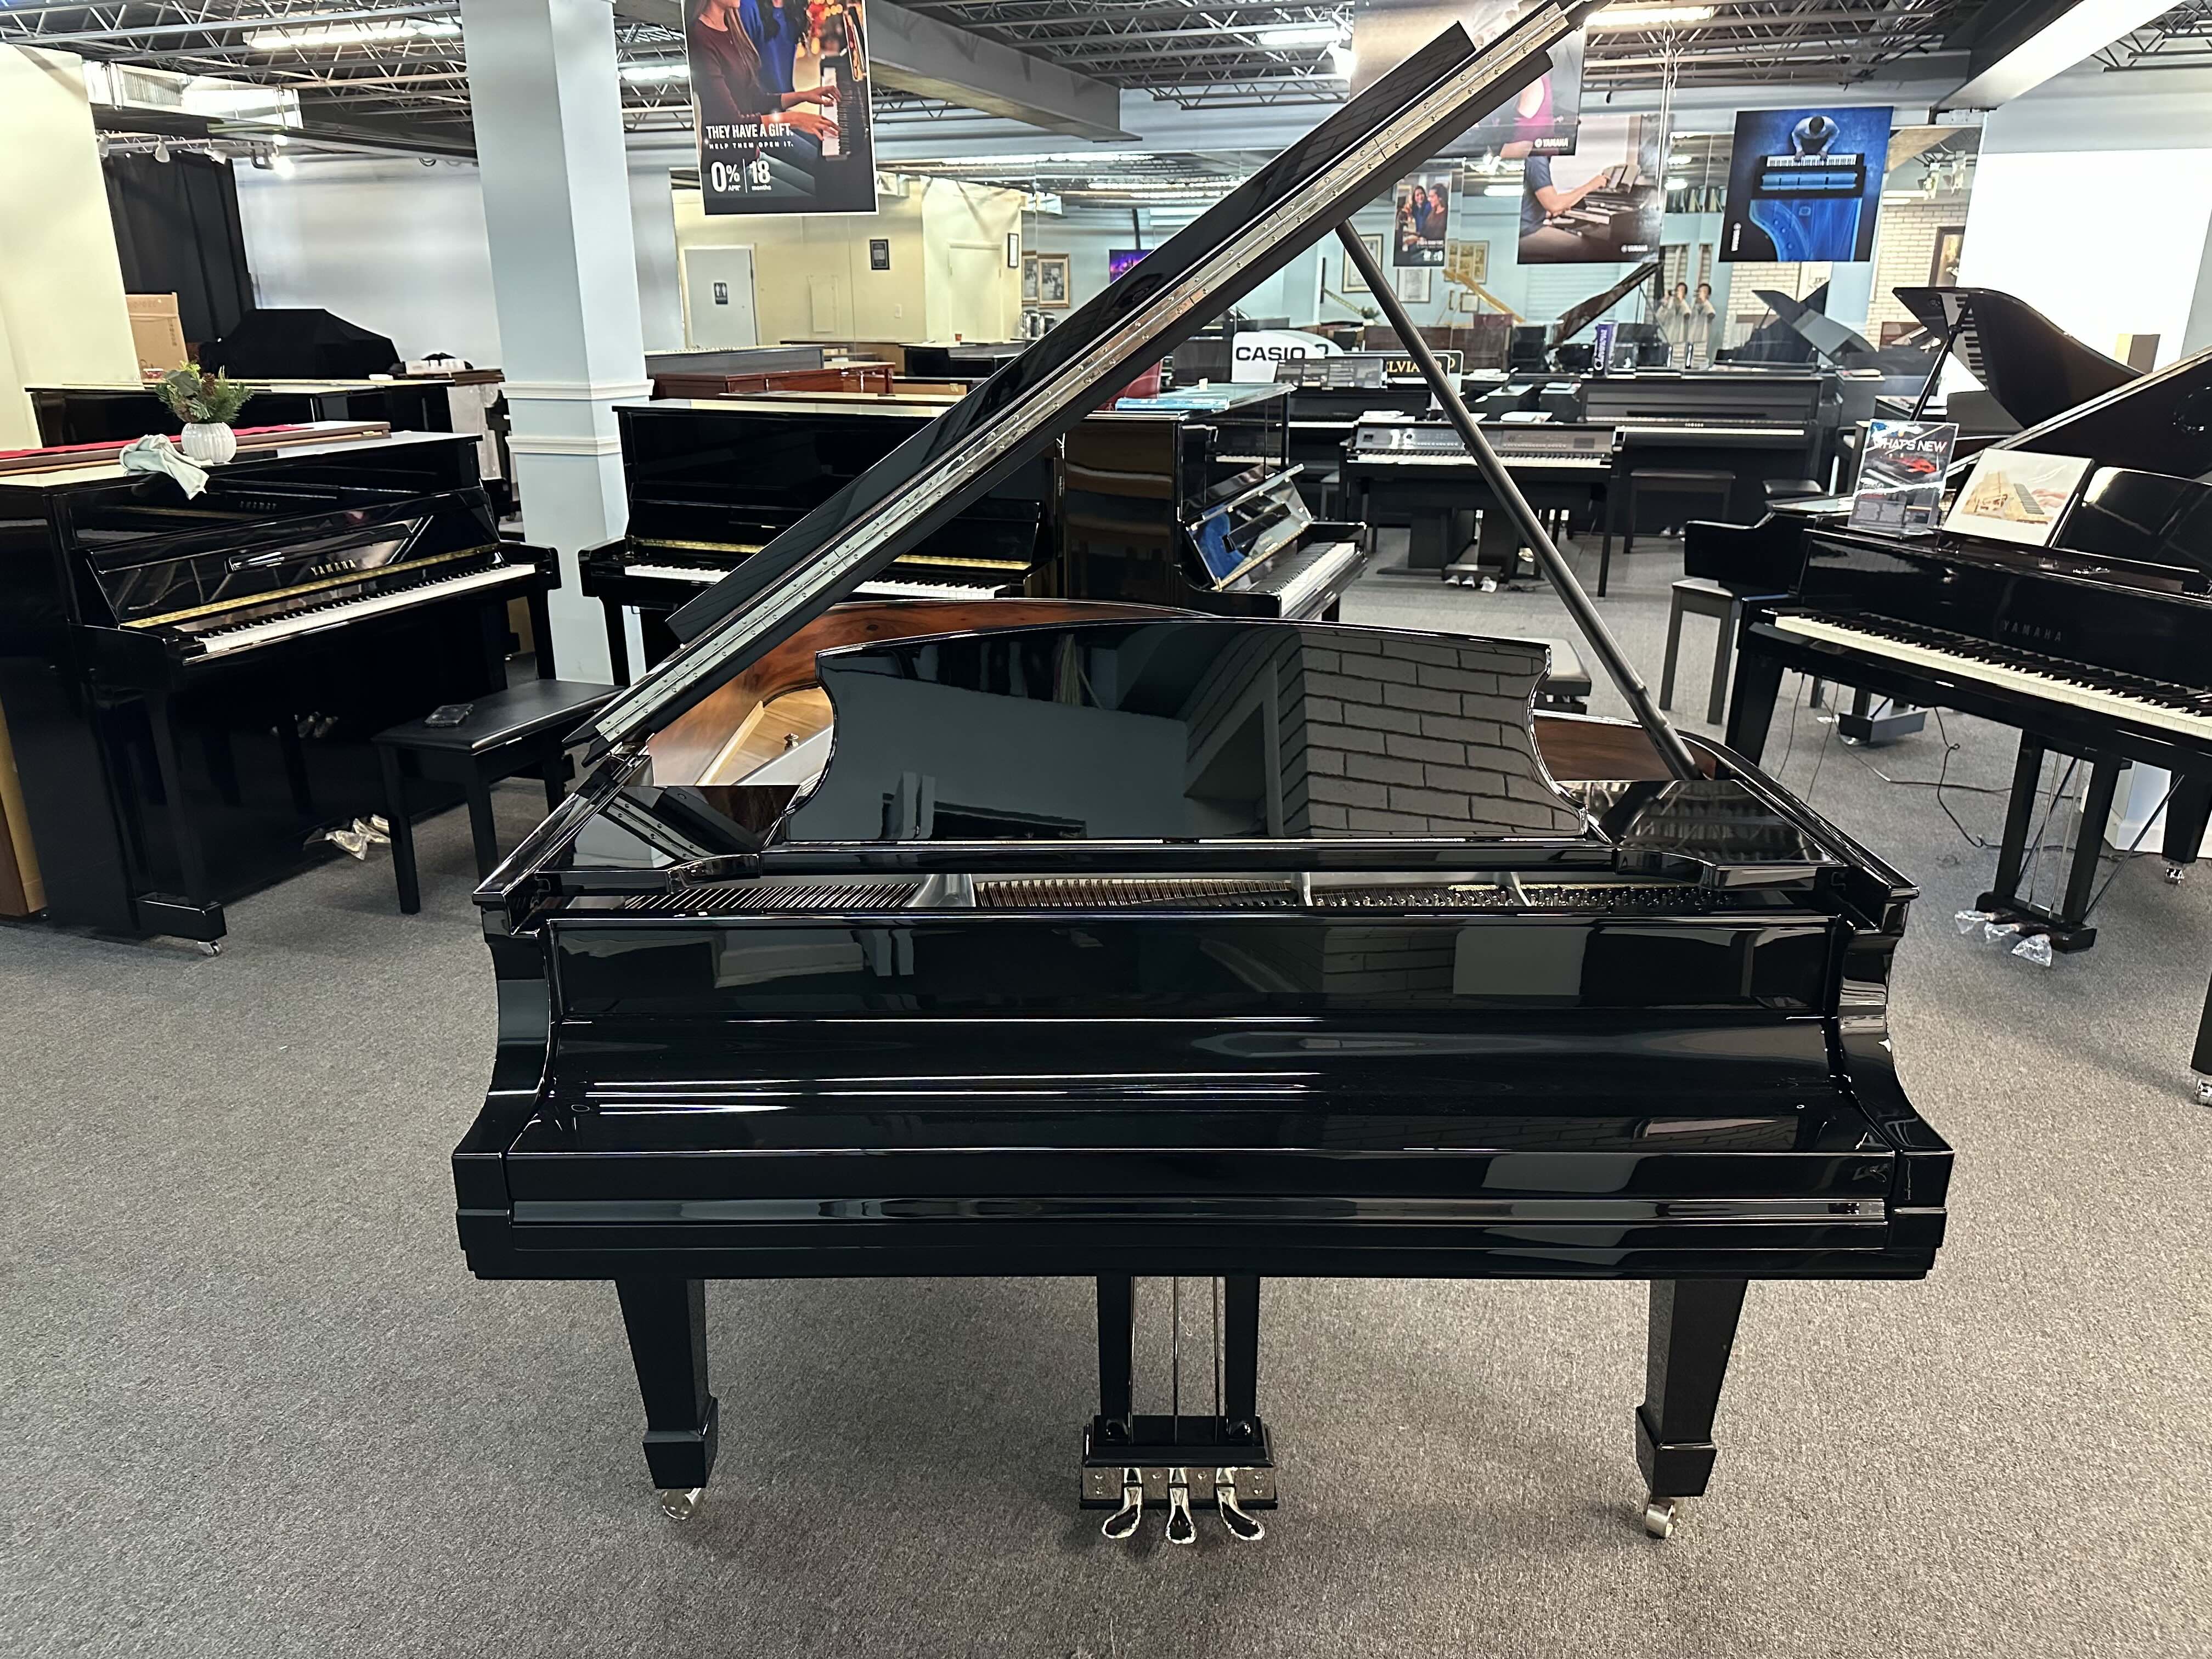 1931 Steinway Model L "Duet" 5'10" Grand Piano in Macassar and Polished Ebony